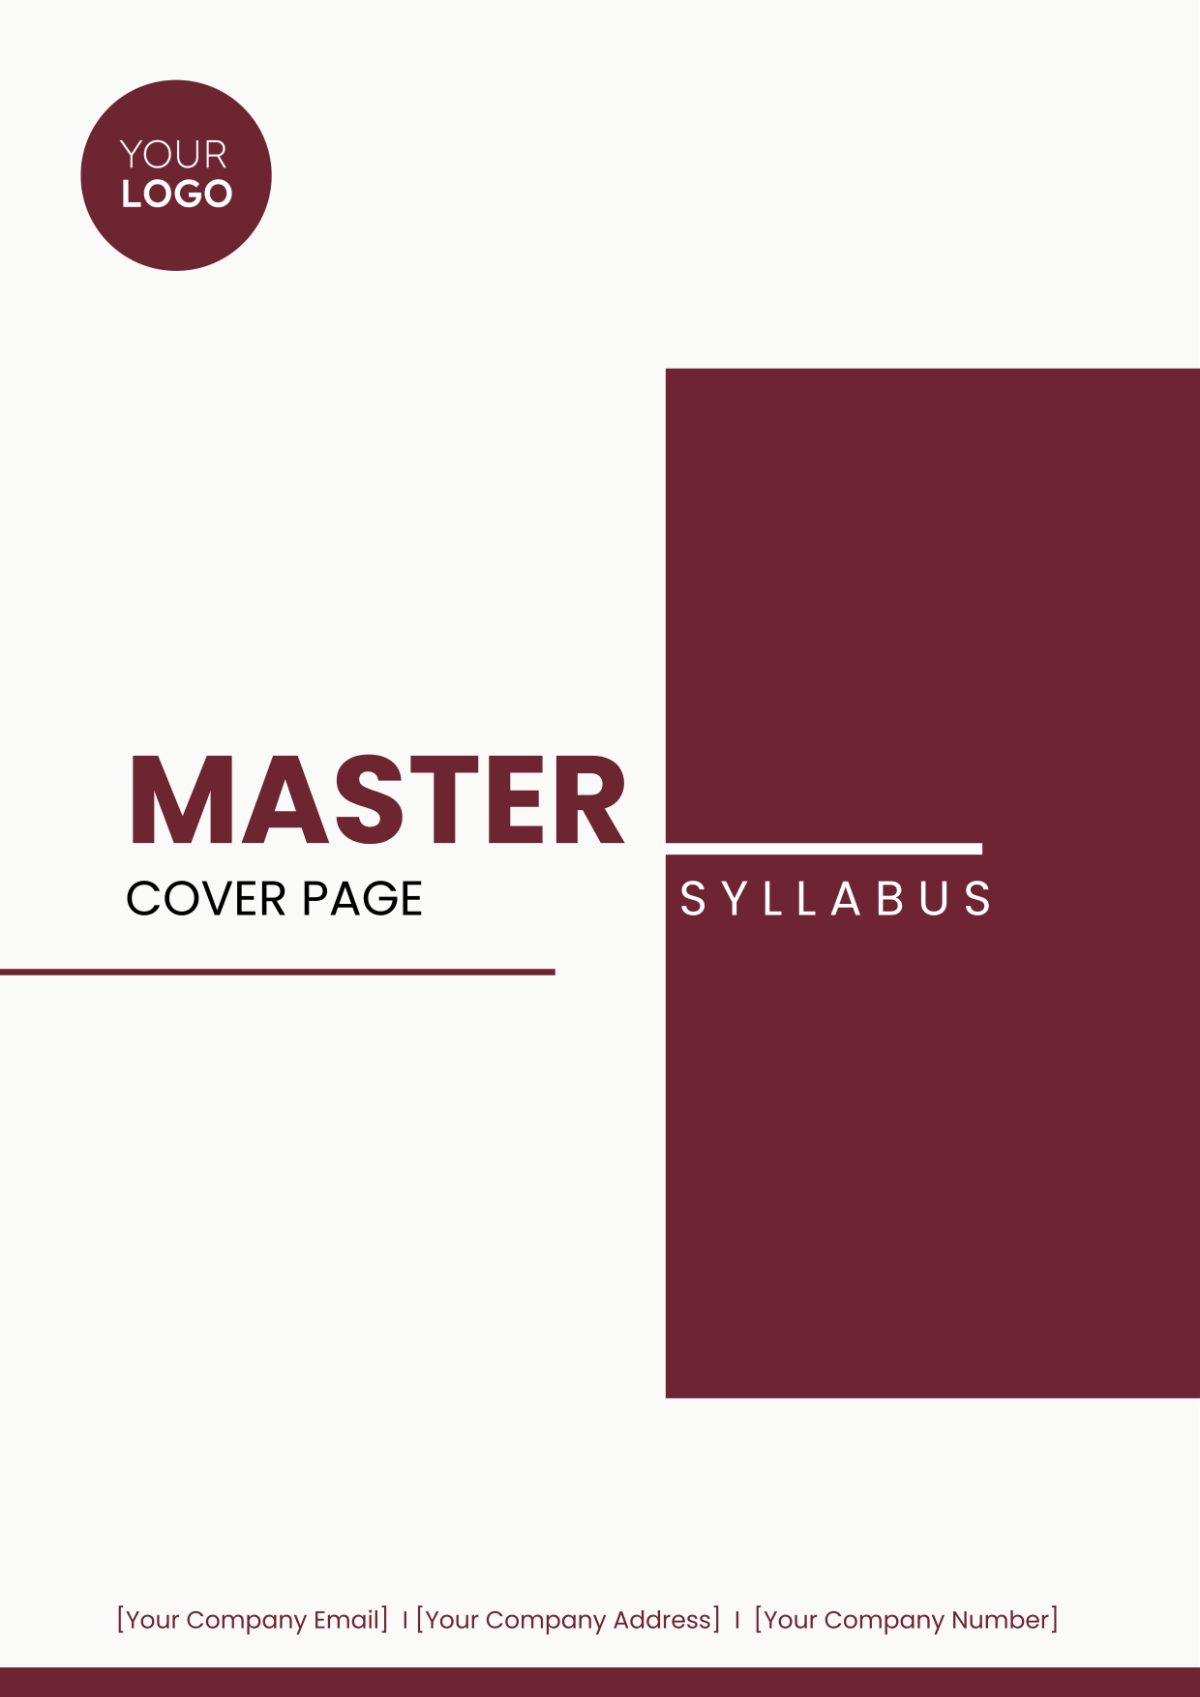 Master Syllabus Cover Page